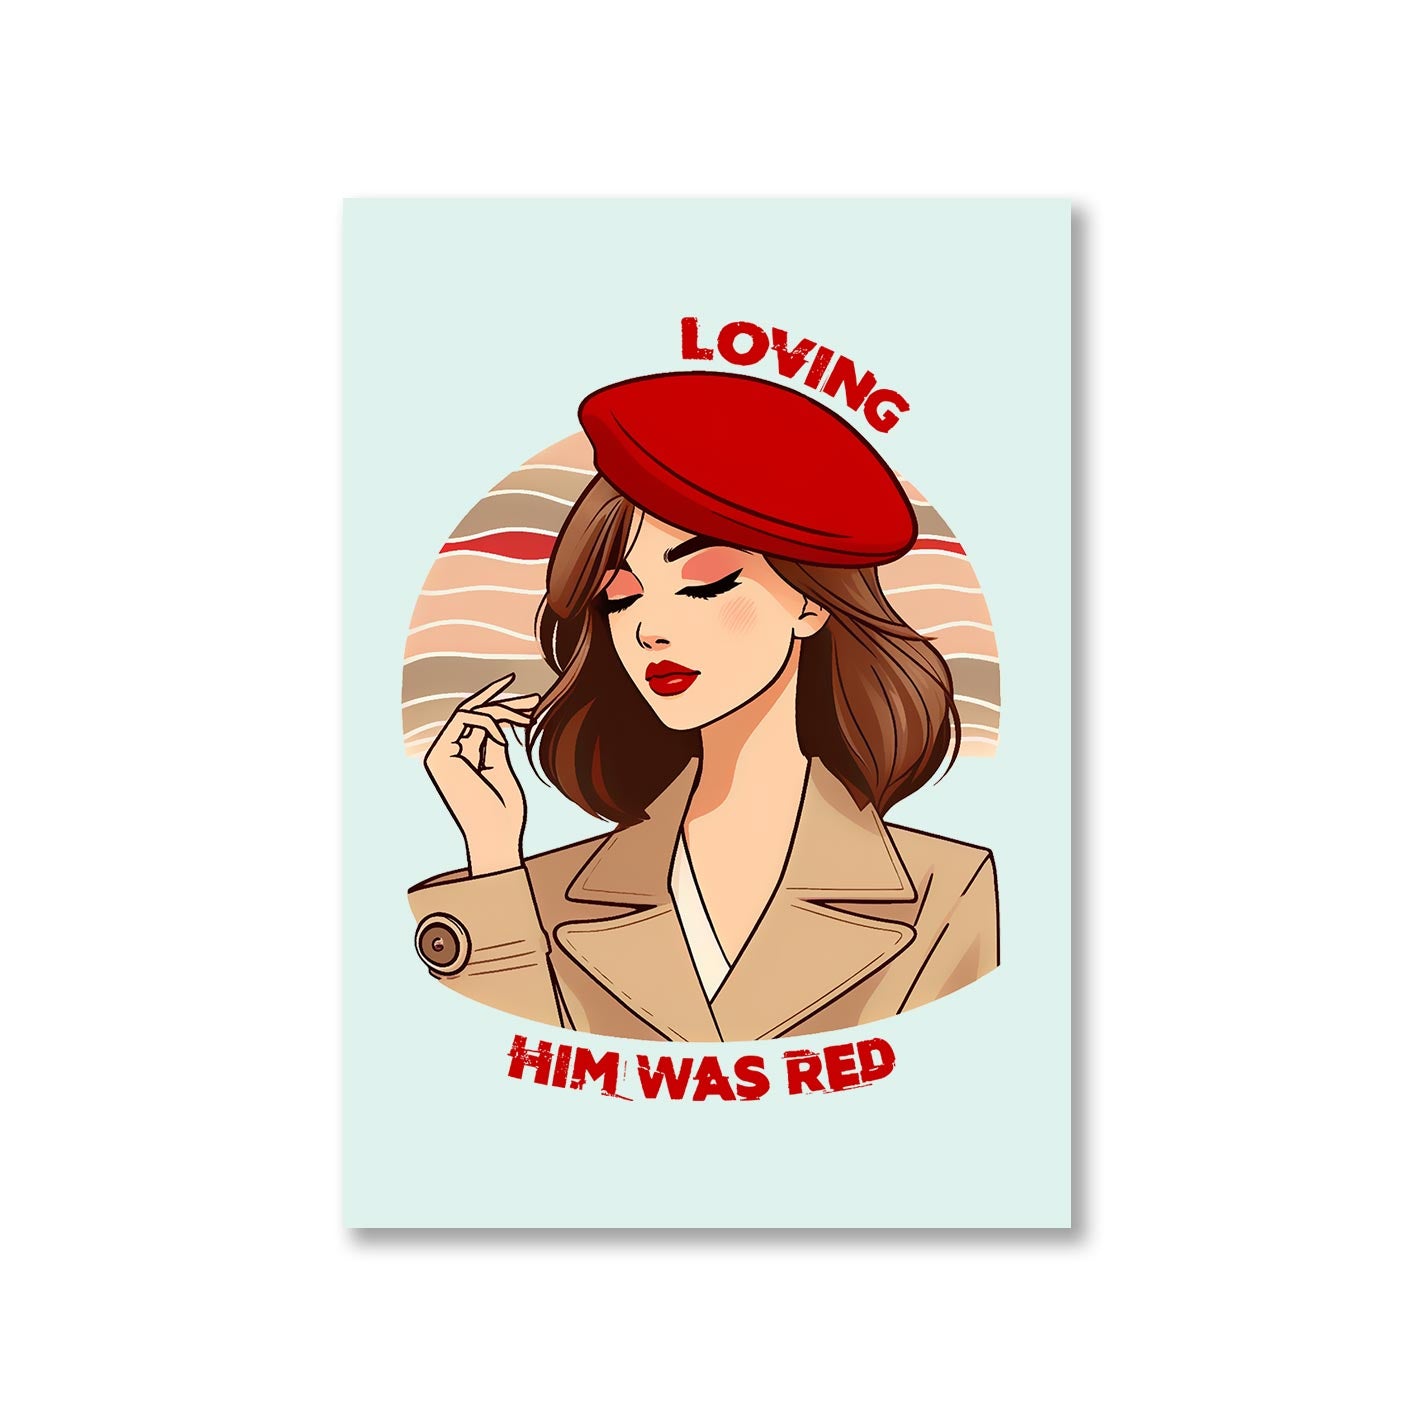 taylor swift loving him was red poster wall art buy online india the banyan tee tbt a4